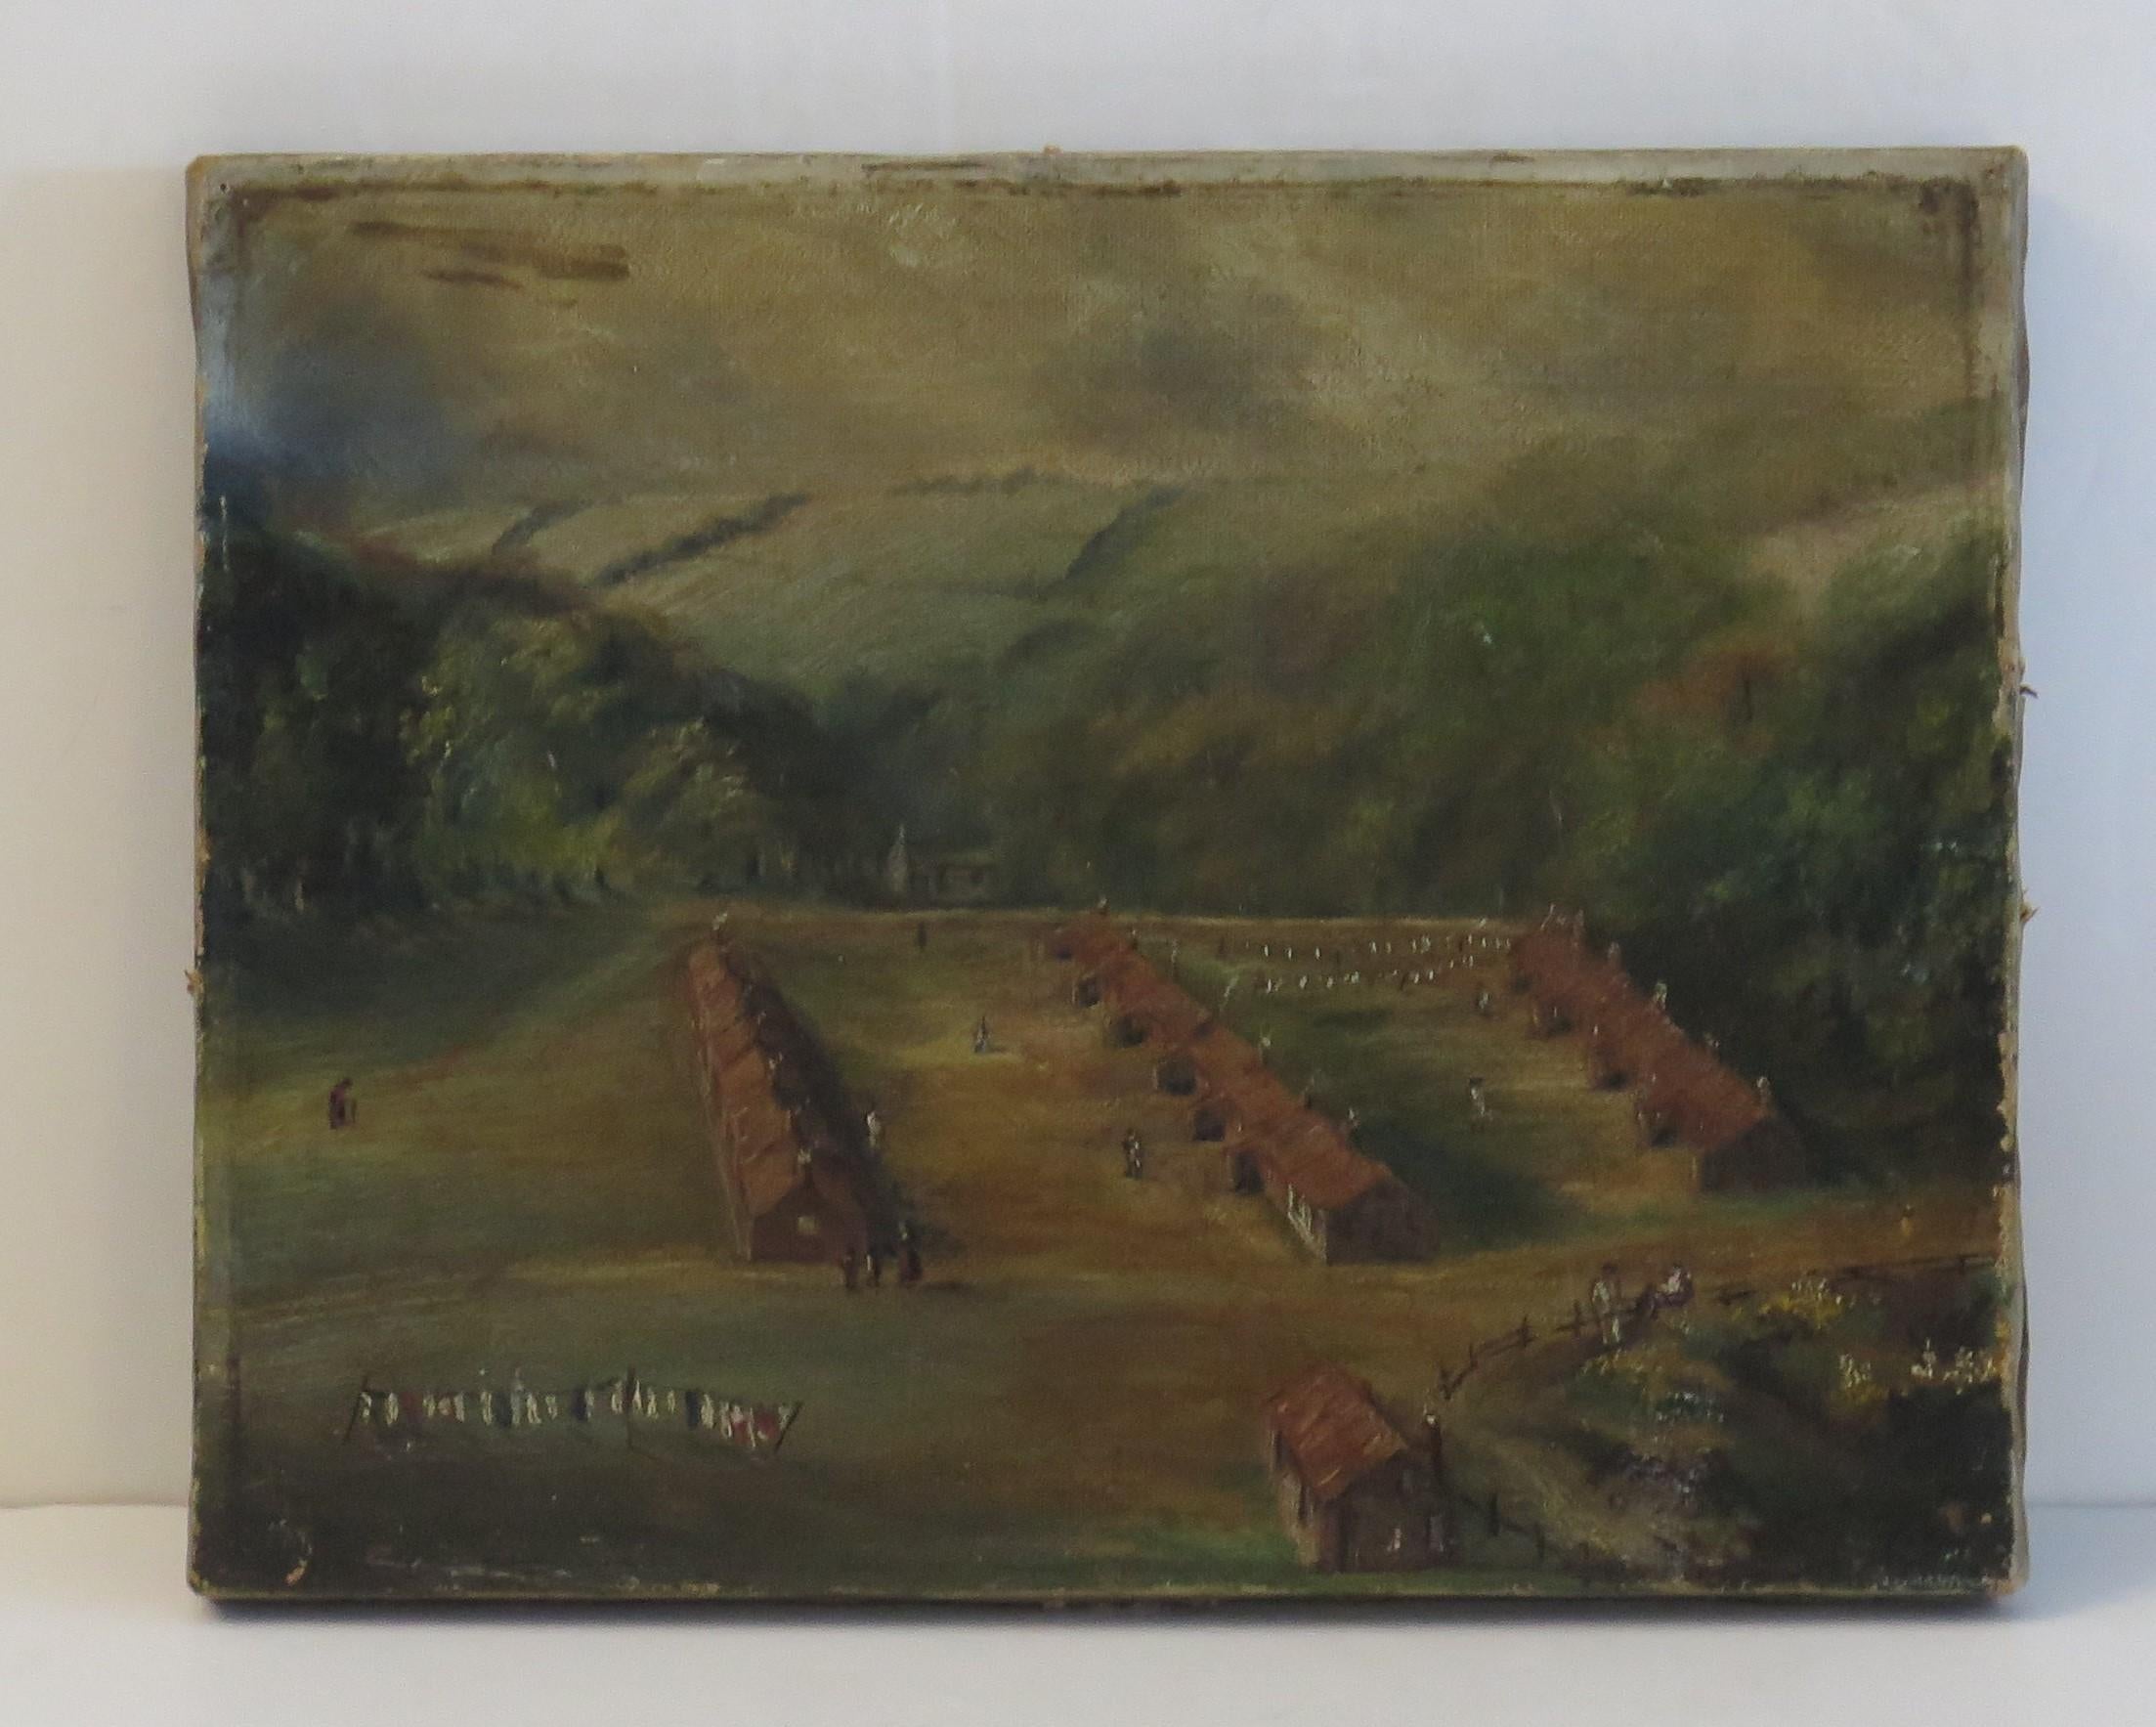 This is a very interesting small antique original, oil on canvas painting, dating to the mid-19th century.

The painting shows a landscape scene of a shanty town of simple buildings, all set in a clearing with woods and high hills in the